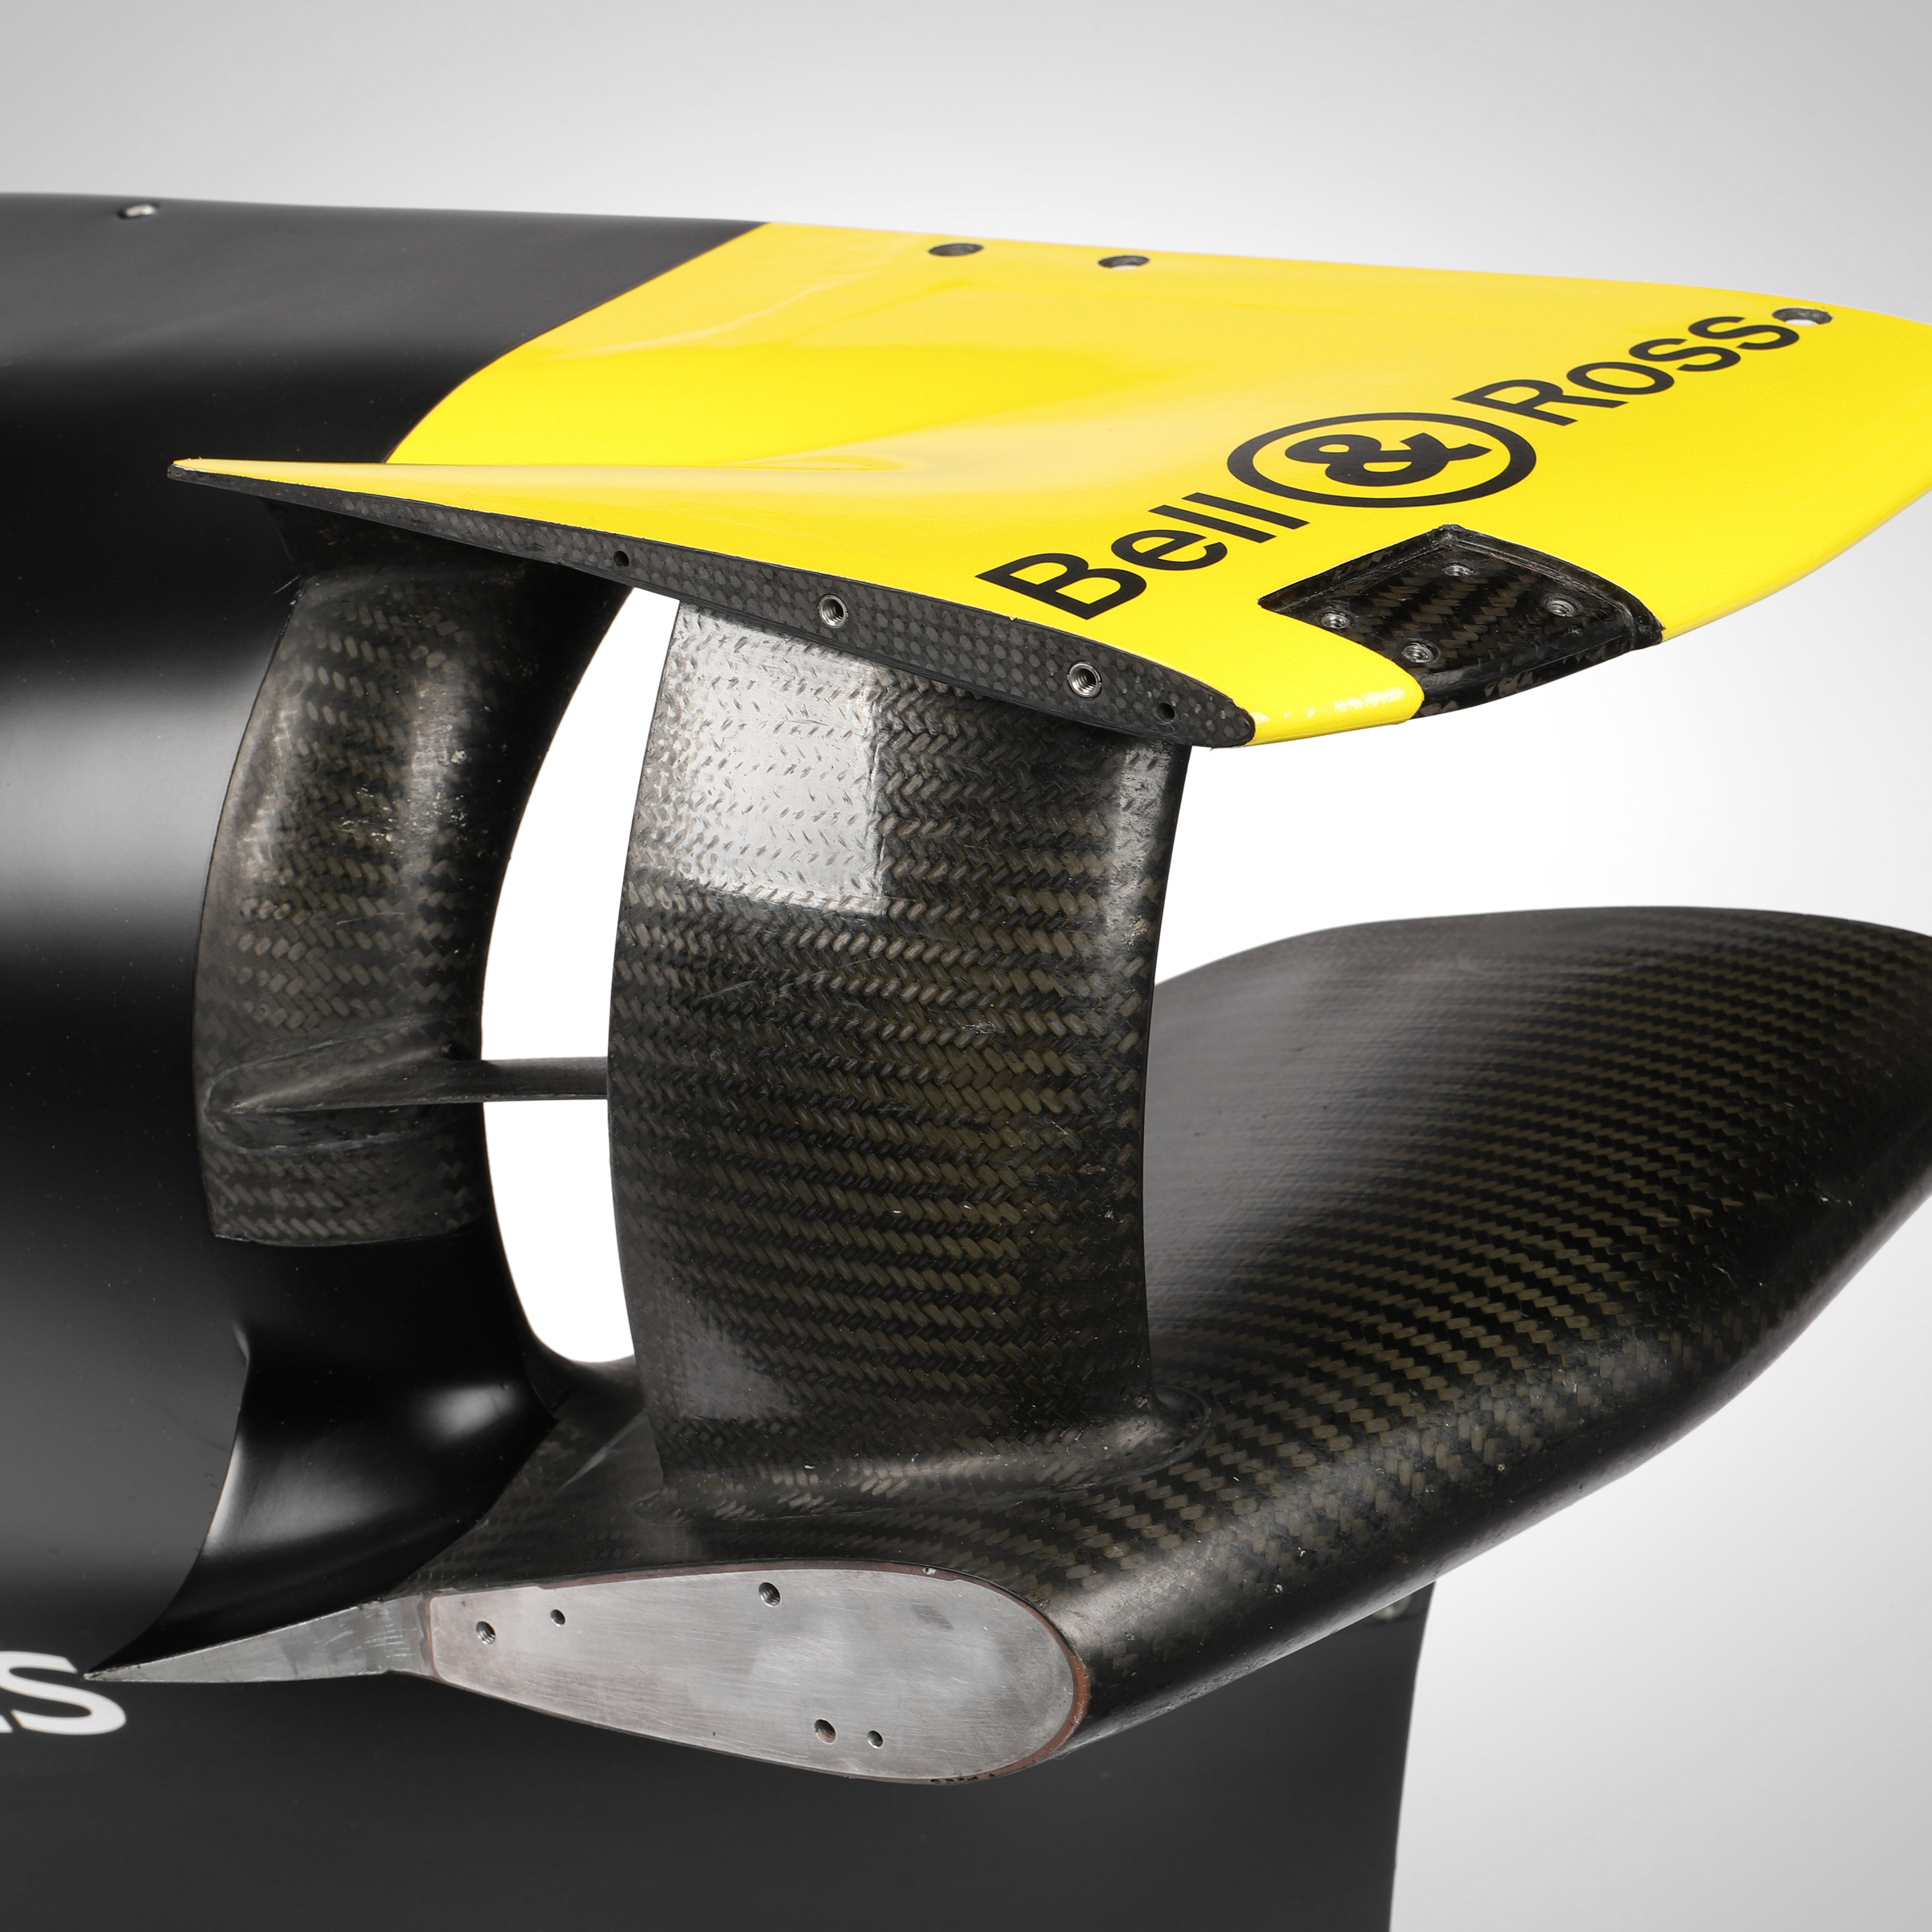 Renault F1 Team 2020 Right-Hand Sidepod